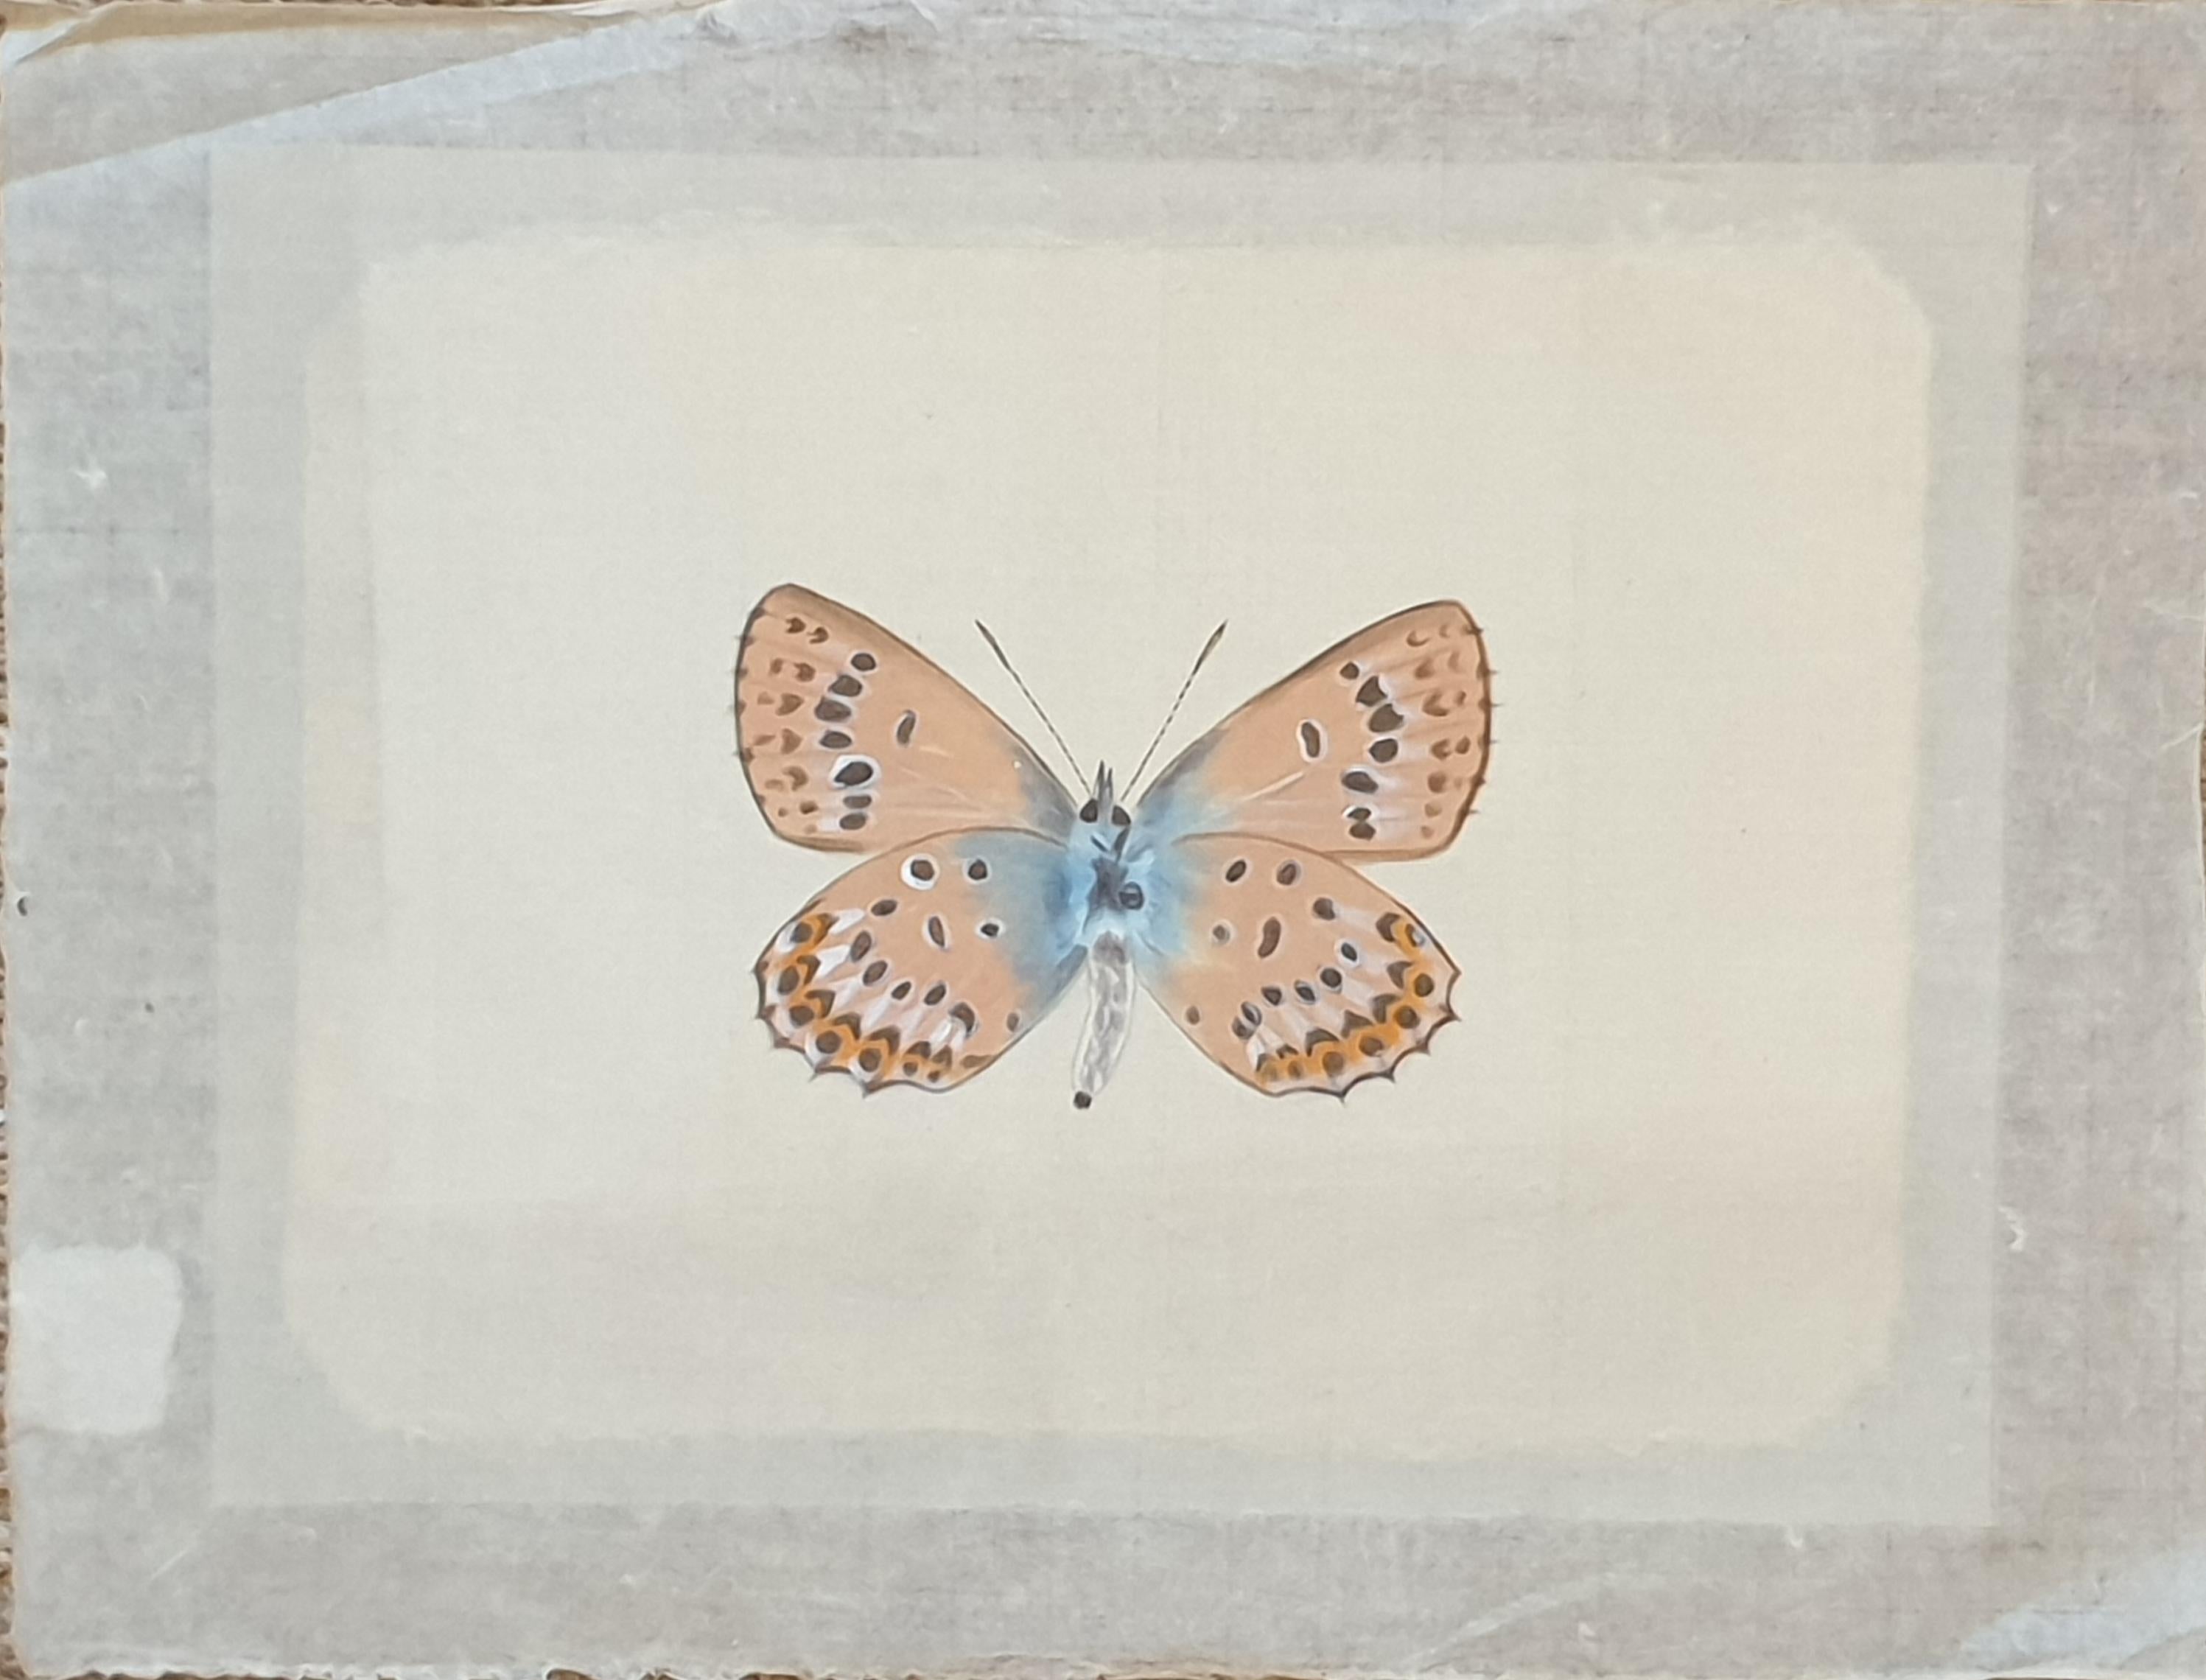 Study of a Butterfly, Watercolour on Silk Applied to Handmade Paper. 